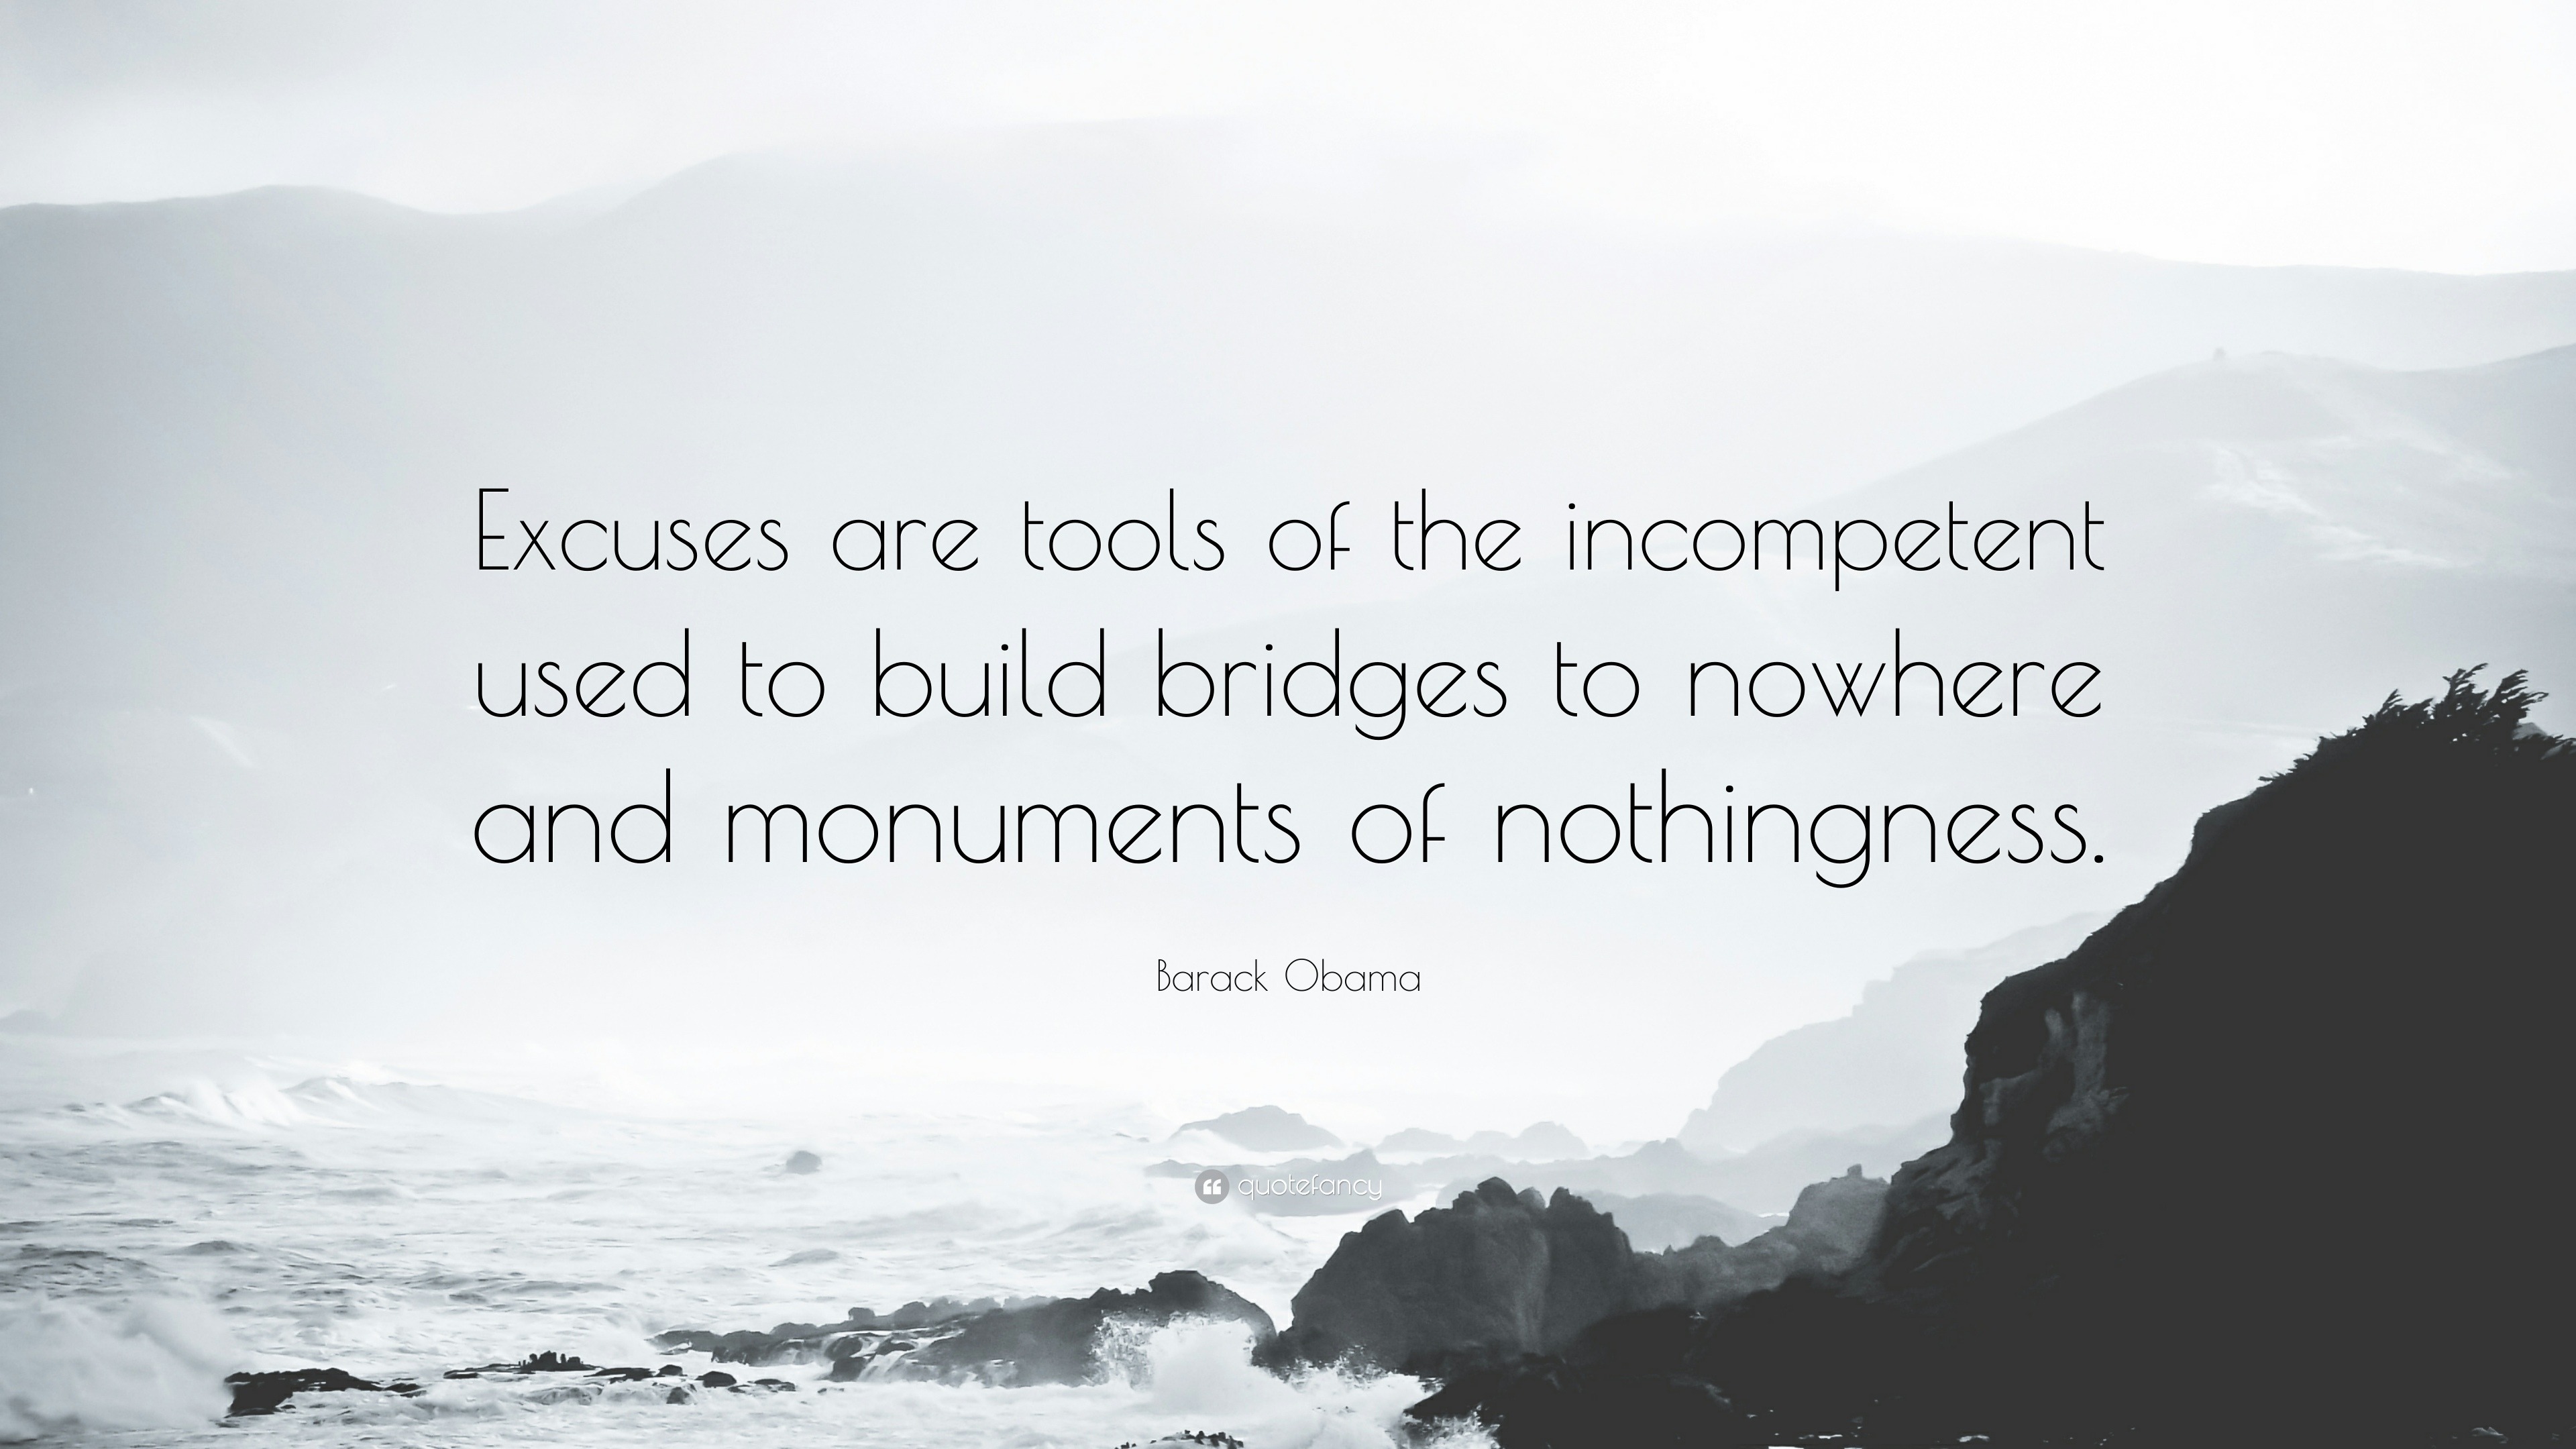 Barack Obama Quote: "Excuses are tools of the incompetent used to build bridges to nowhere and ...